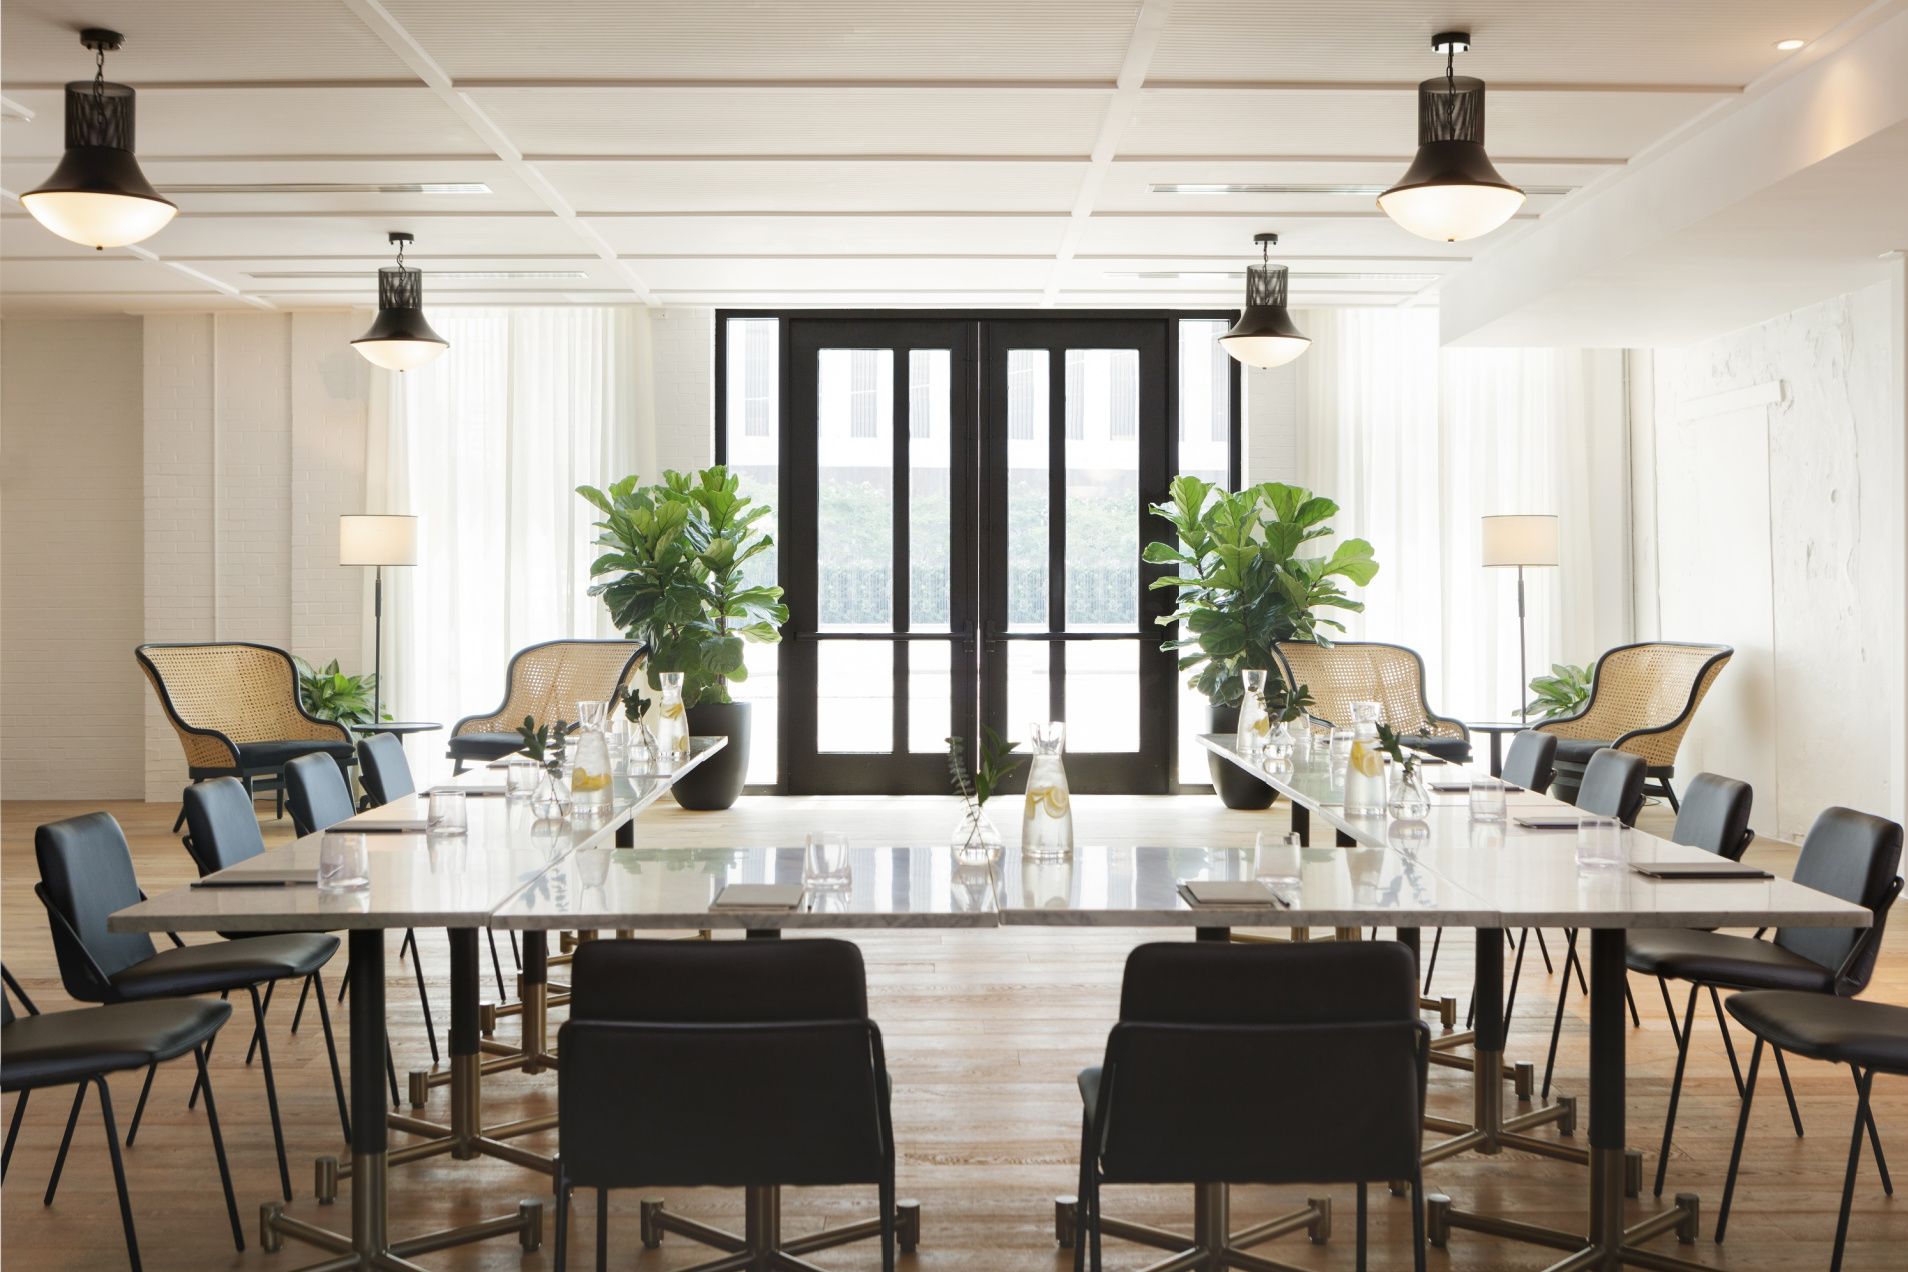 bright natural light in a spacious meeting room in a u-shape setting with plants